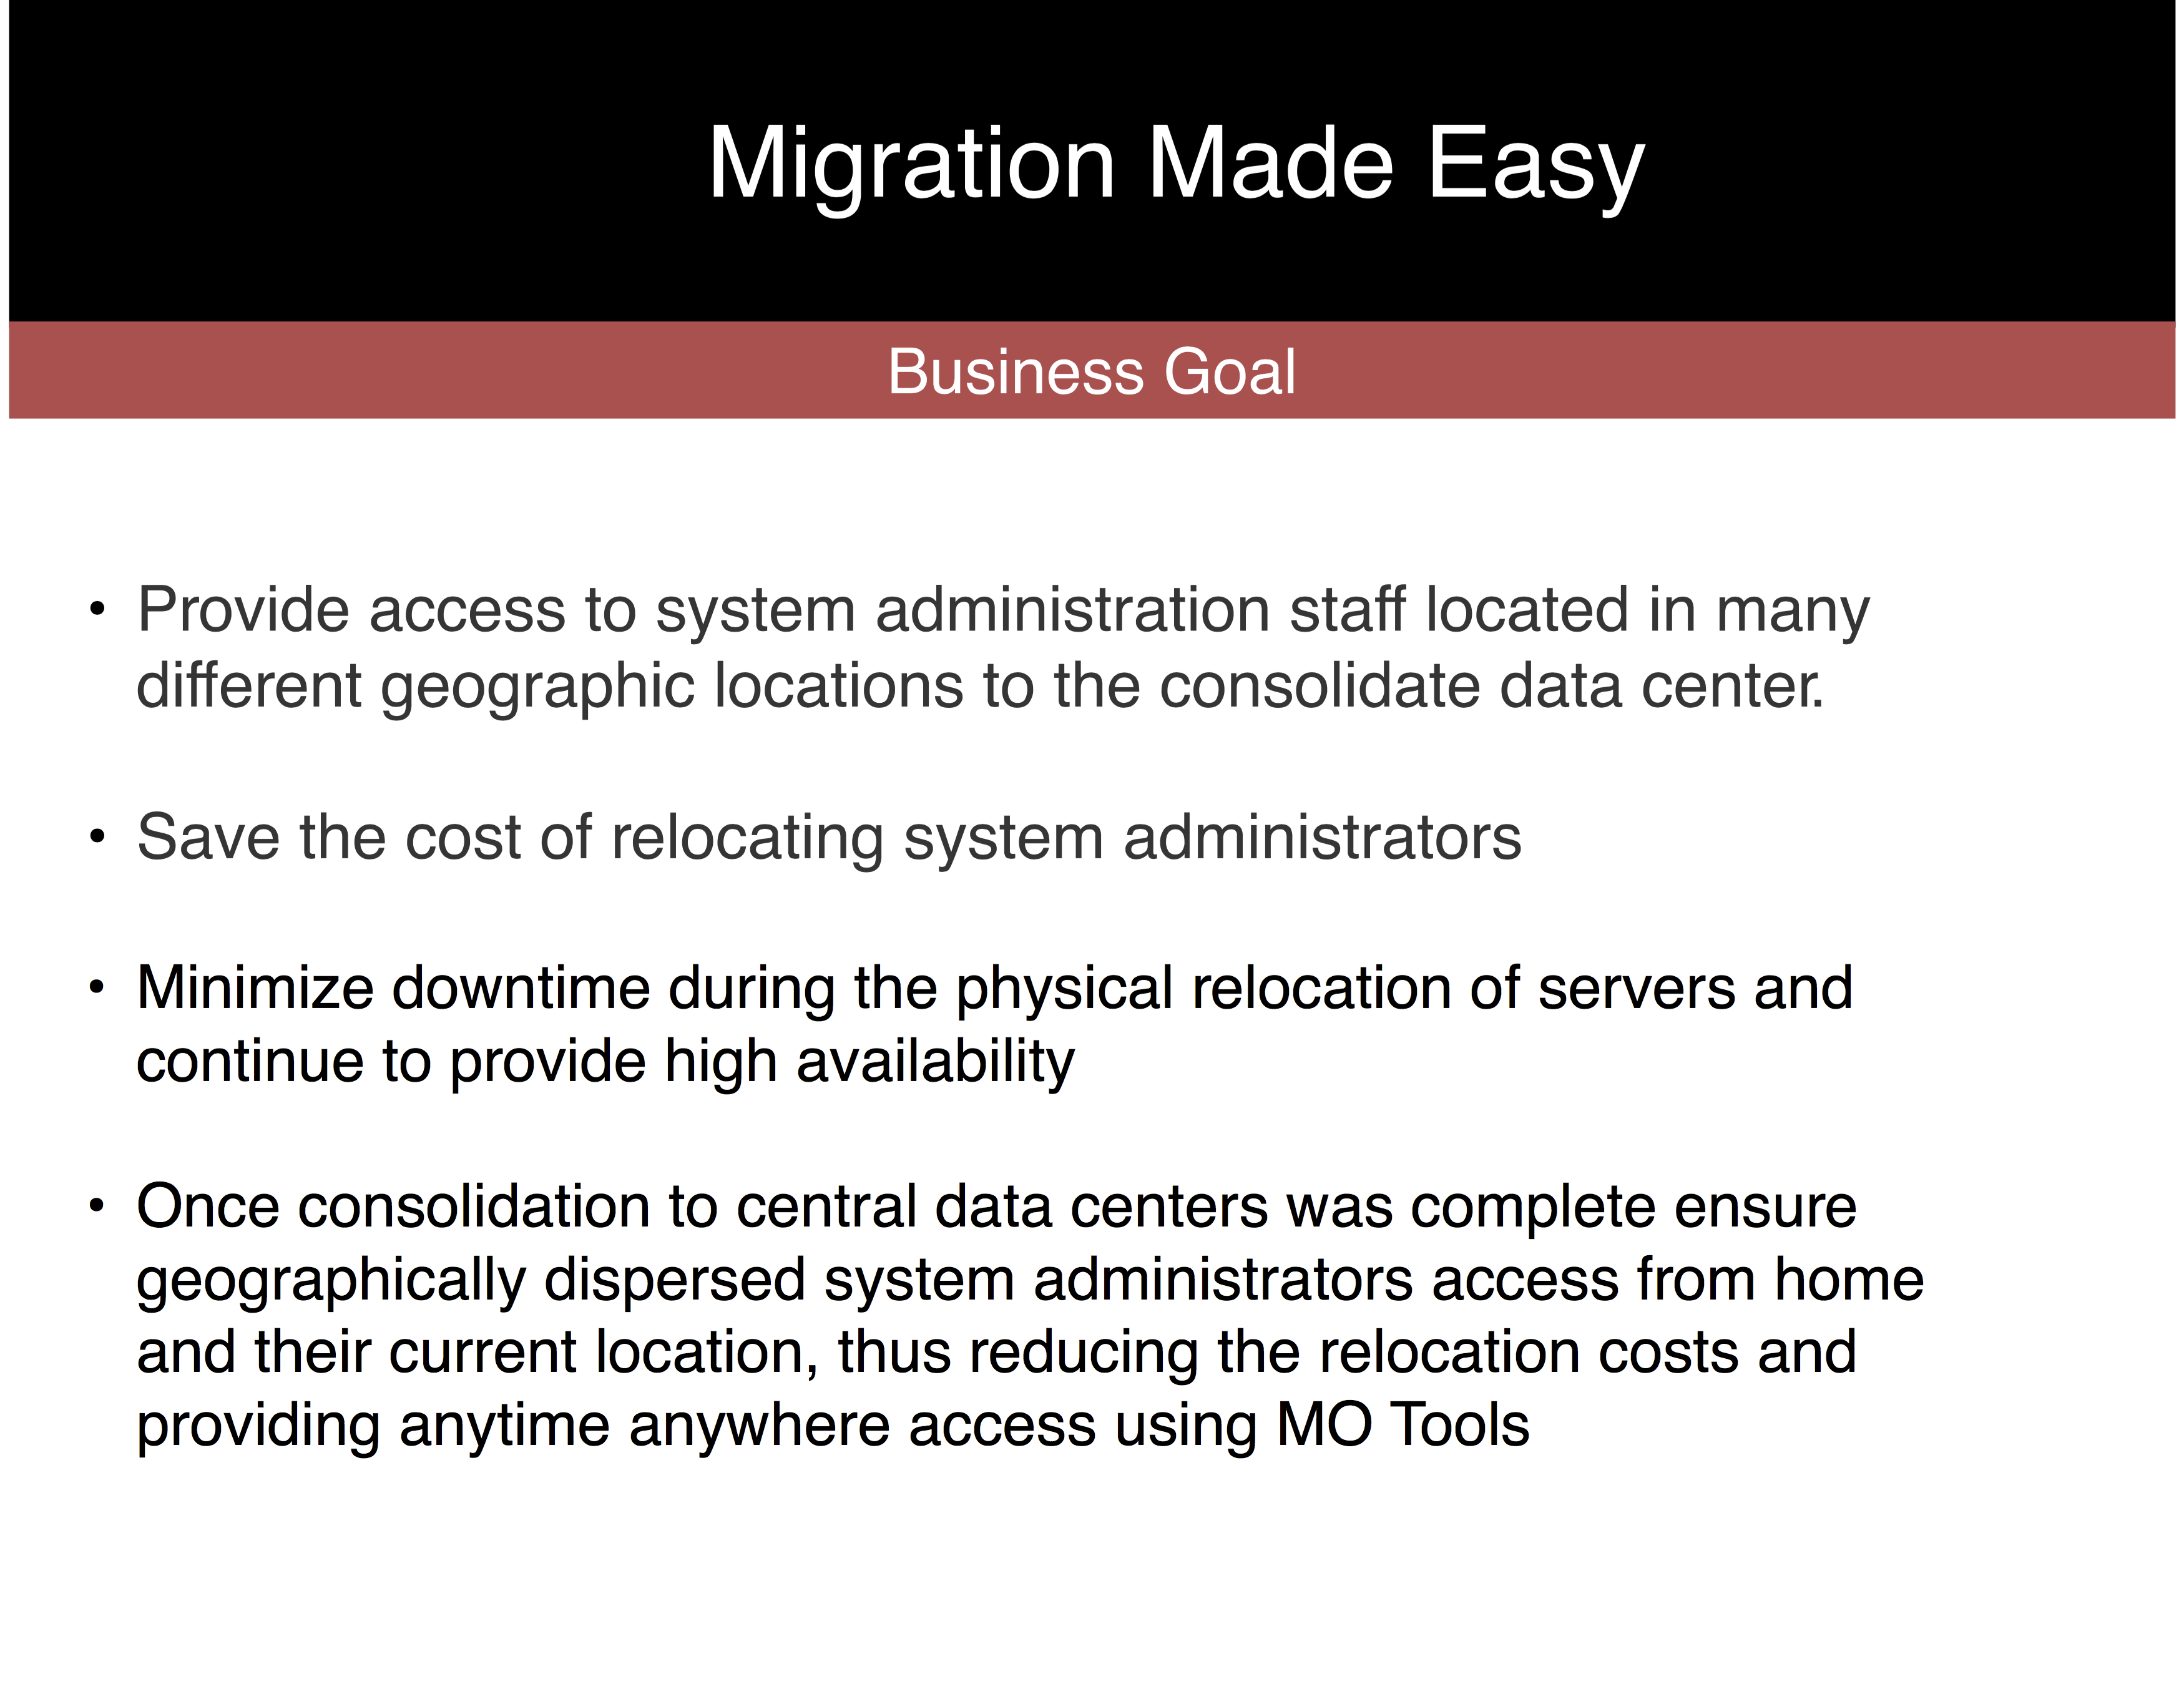 Business Goal of Migration